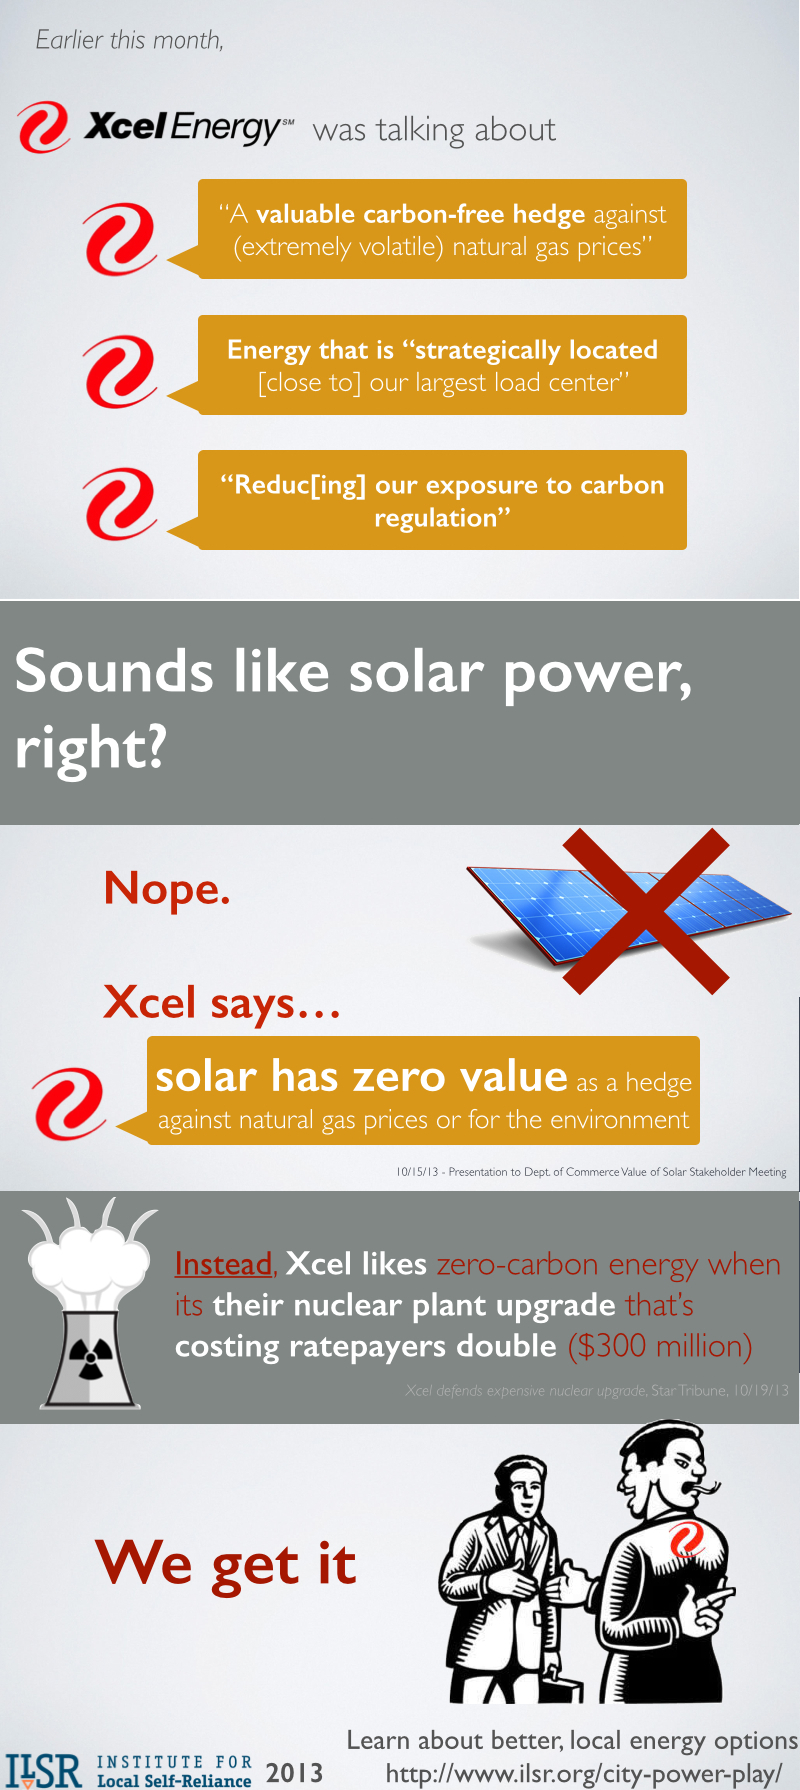 xcel-two-faced-on-value-of-solar-power-institute-for-local-self-reliance